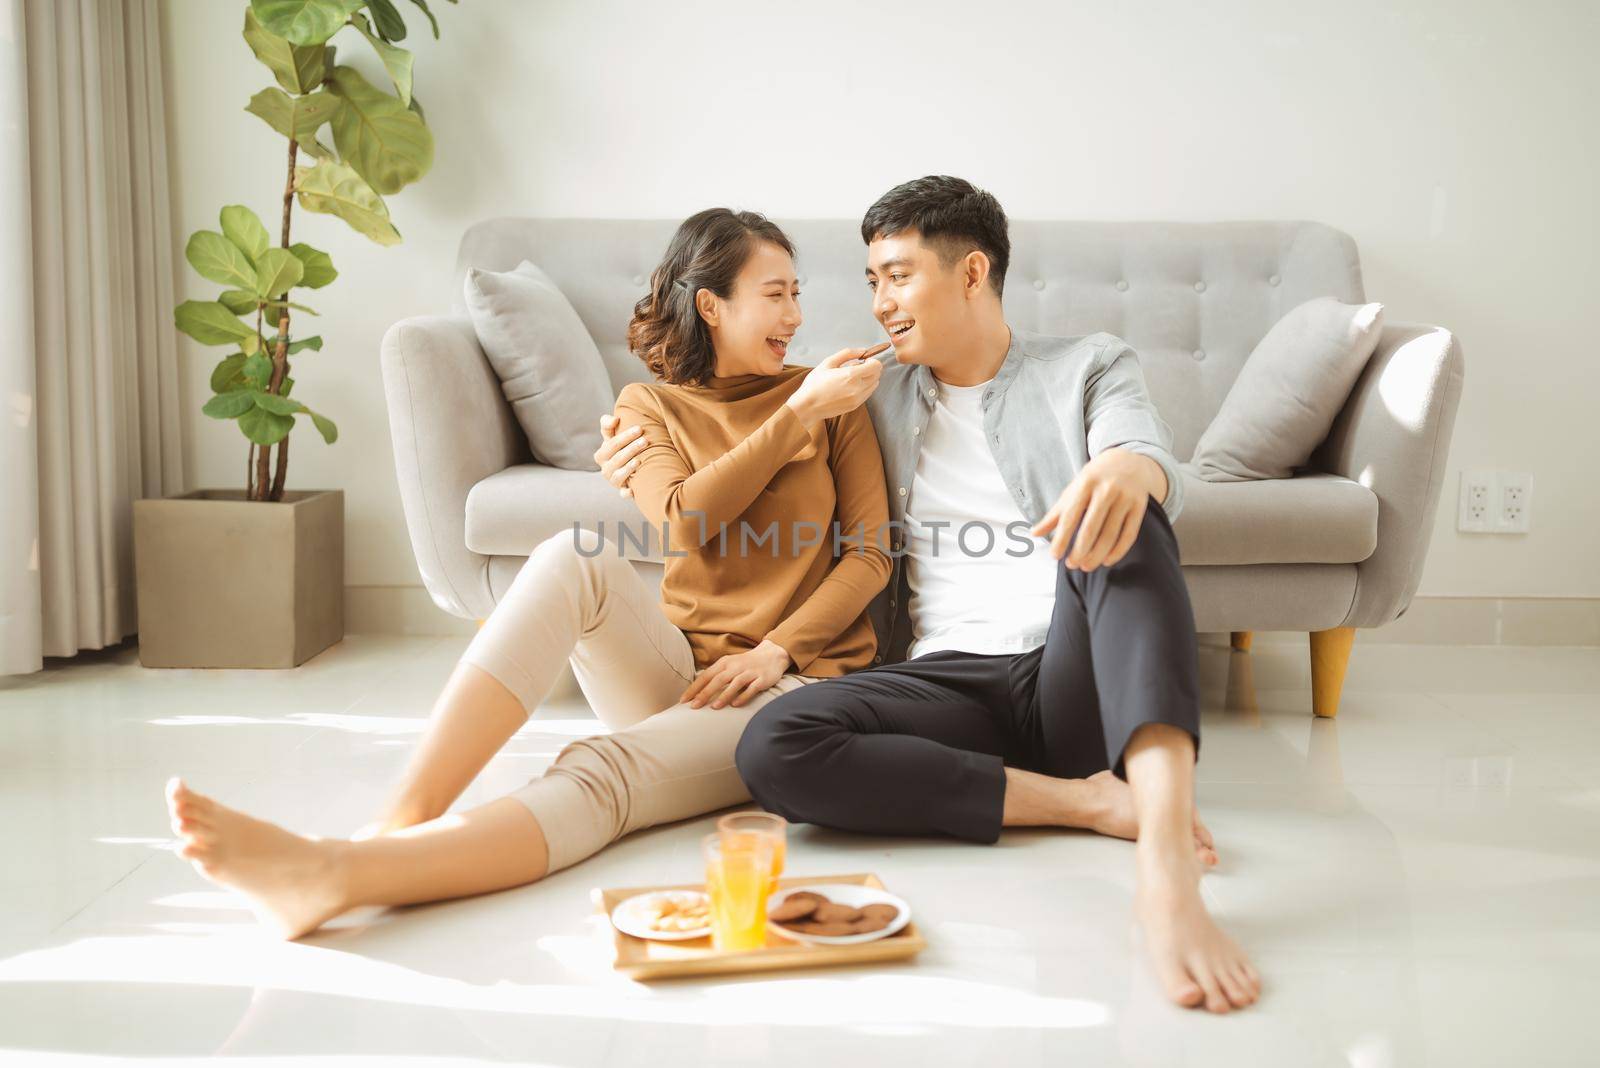 Relaxing at home. Happy young man and woman drinking hot beverage with sweet pastry. They are sitting at table on floor near couch and smiling